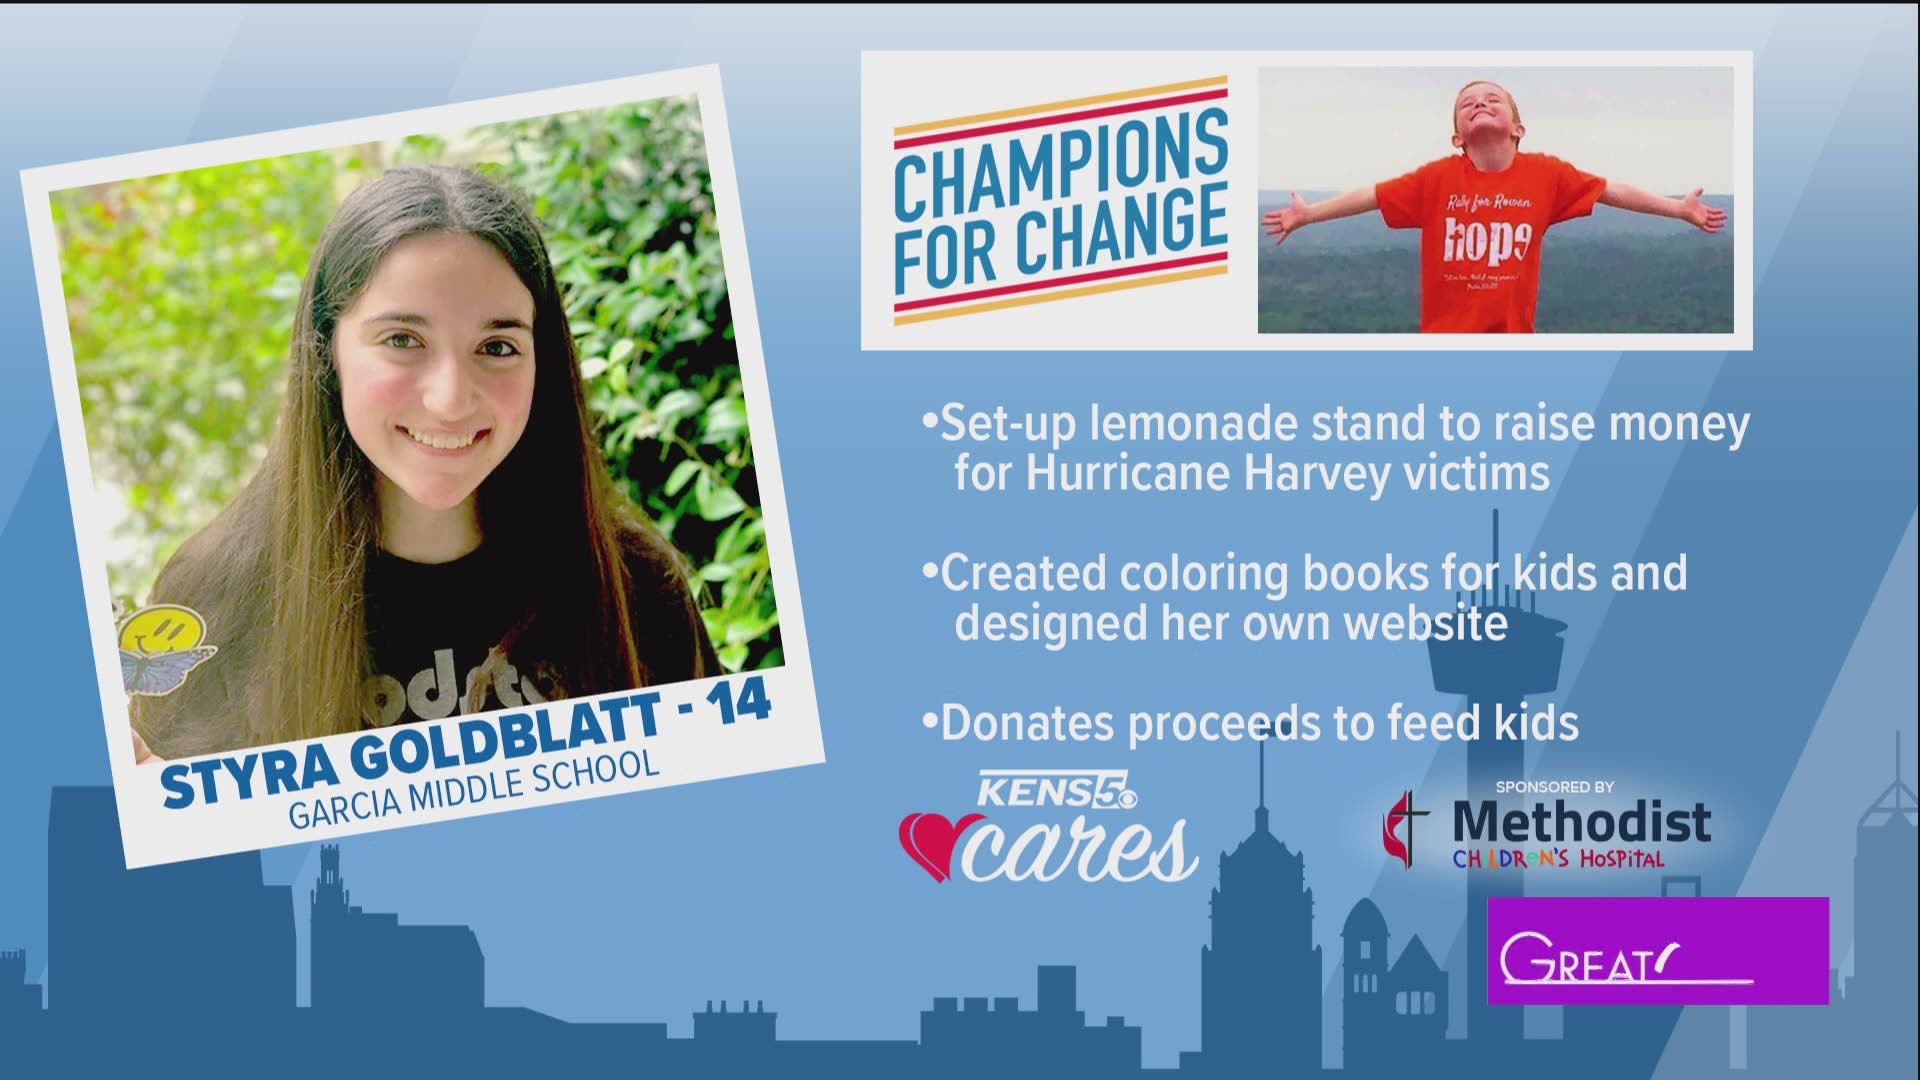 Congratulations to Styra Goldblatt, our Champion for Change! She raised money for Hurricane Harvey victims and created coloring books for kids in the hospital.